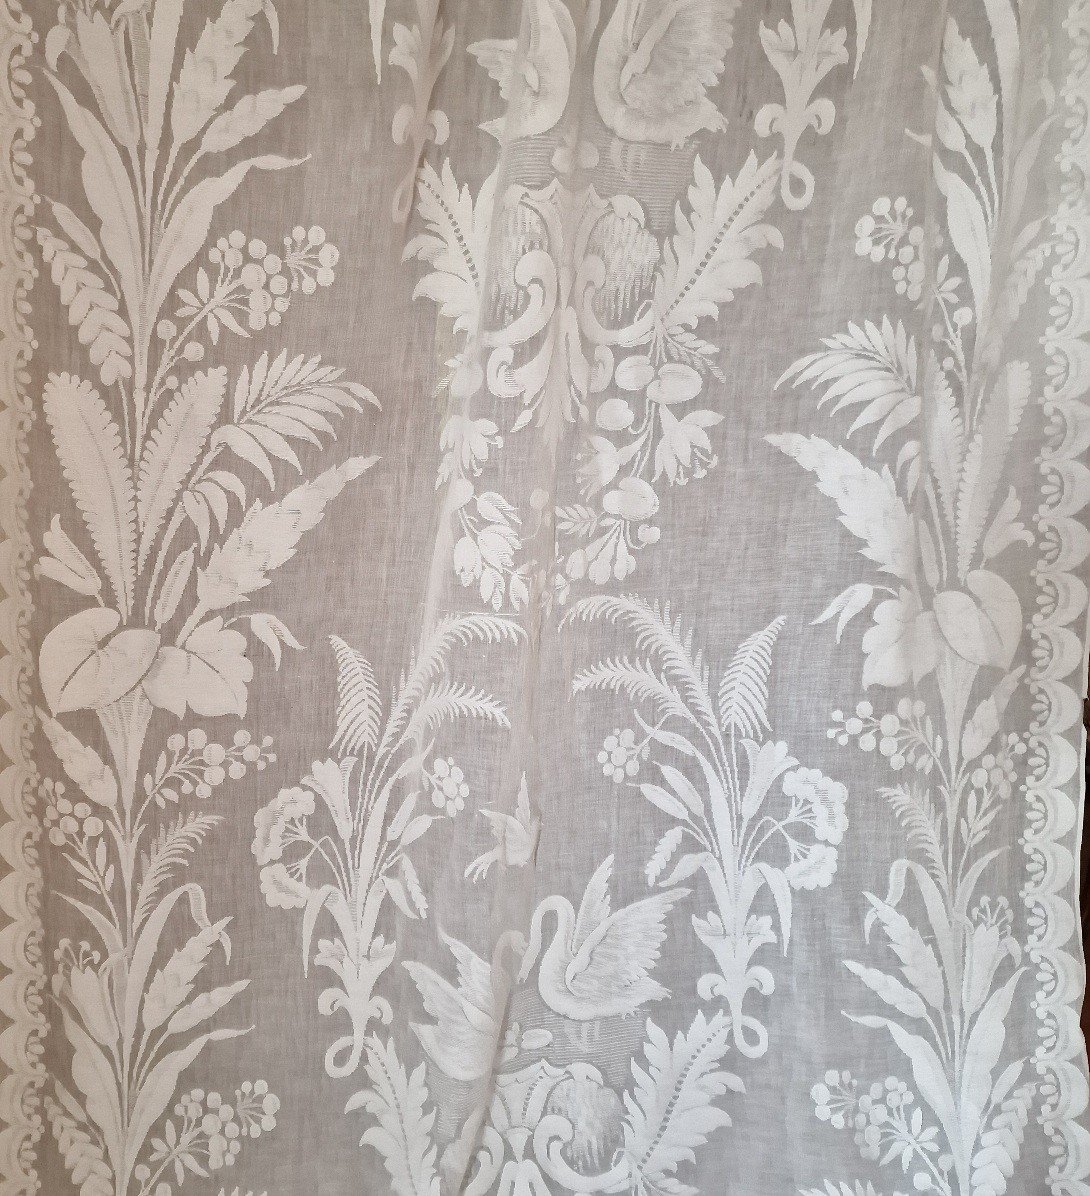 Curtain Panel Or Blind - First Third Of The 20th Century - Cotton Voile - -photo-2